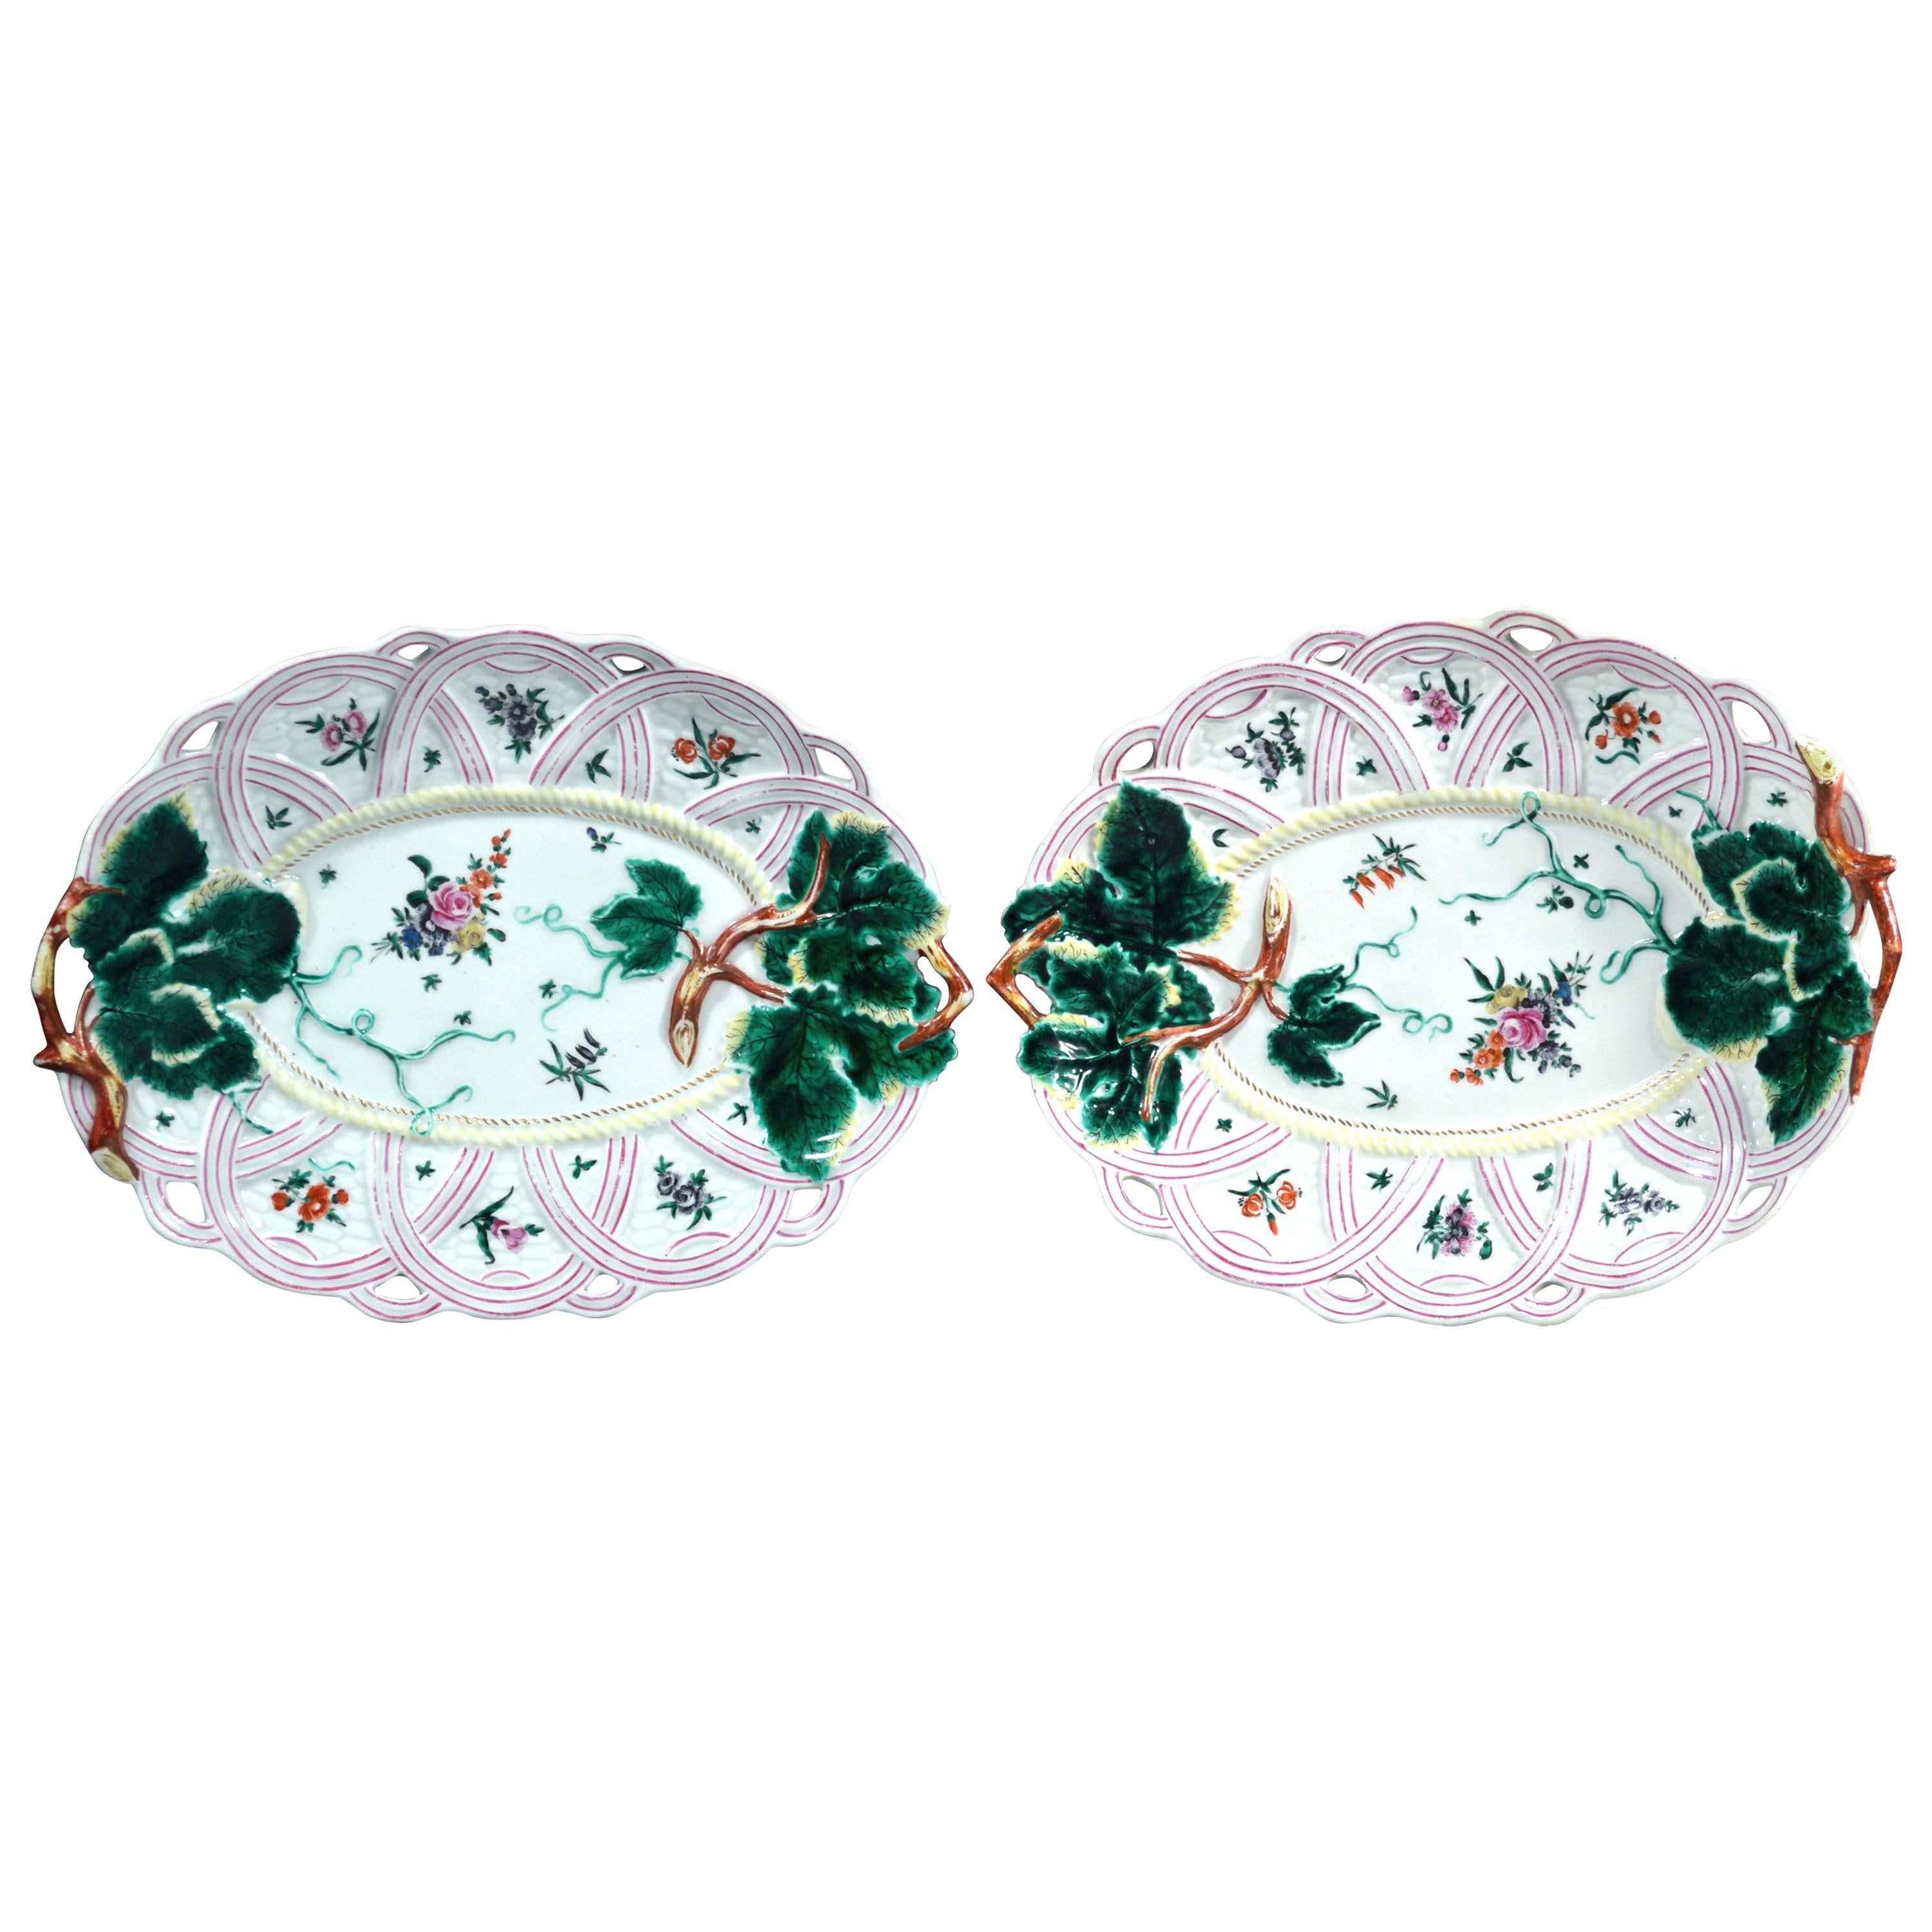 First Period Worcester Pair of Porcelain Basket Leaf Dishes, circa 1758-1760